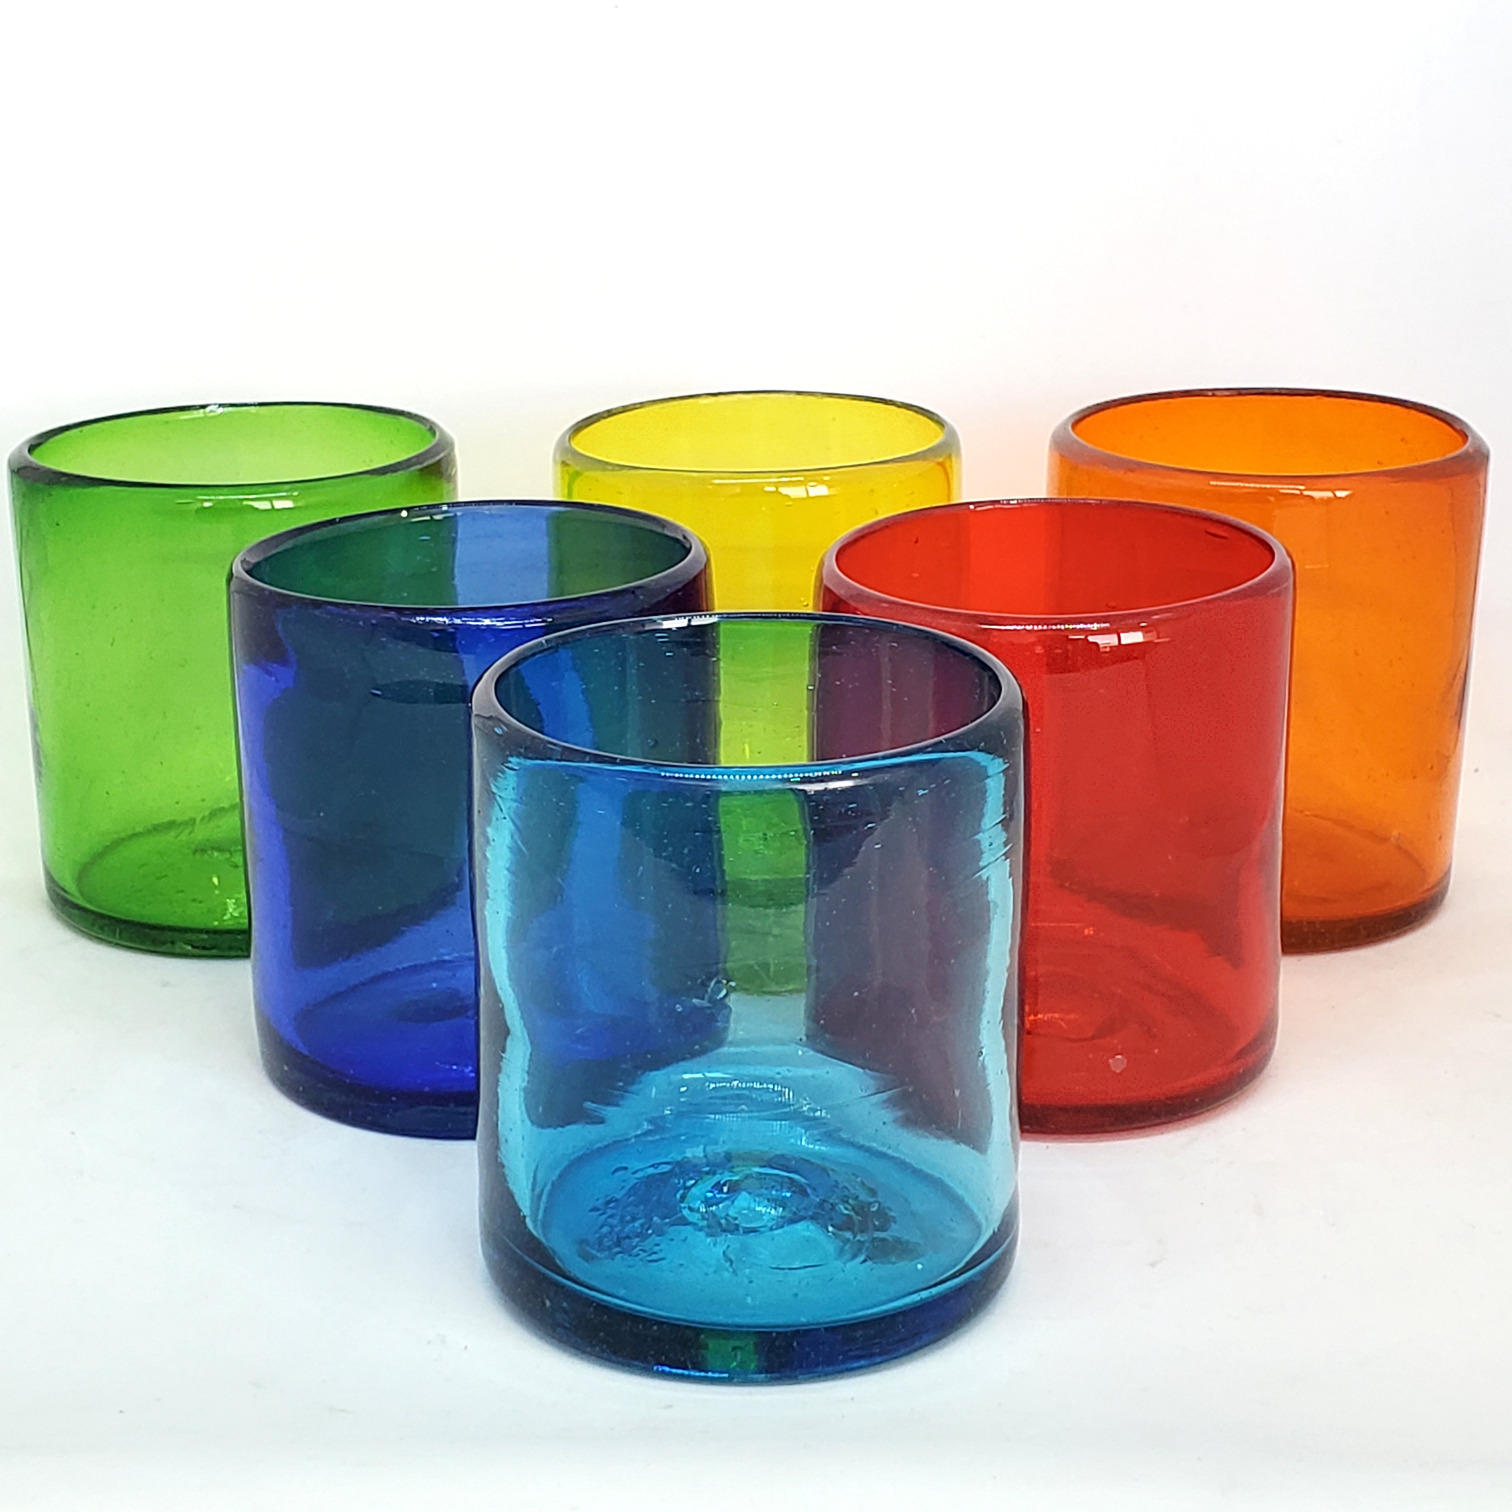 New Items / Rainbow Colored 9 oz Short Tumblers  / Enhance your favorite drink with these colorful handcrafted glasses.